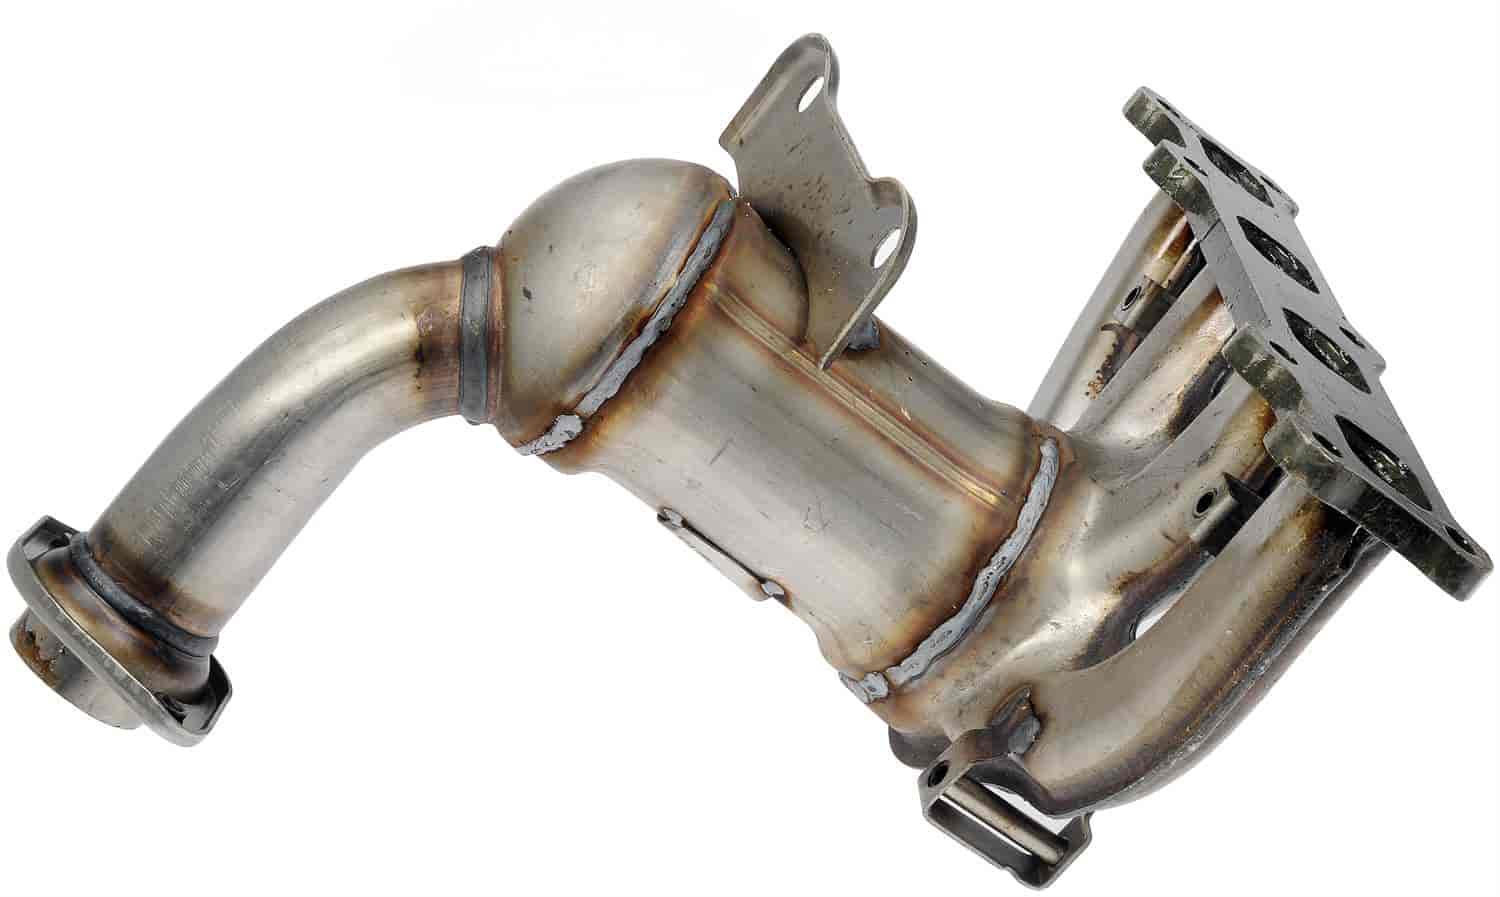 Exhaust Manifold Converter - Tubular - Includes Gaskets